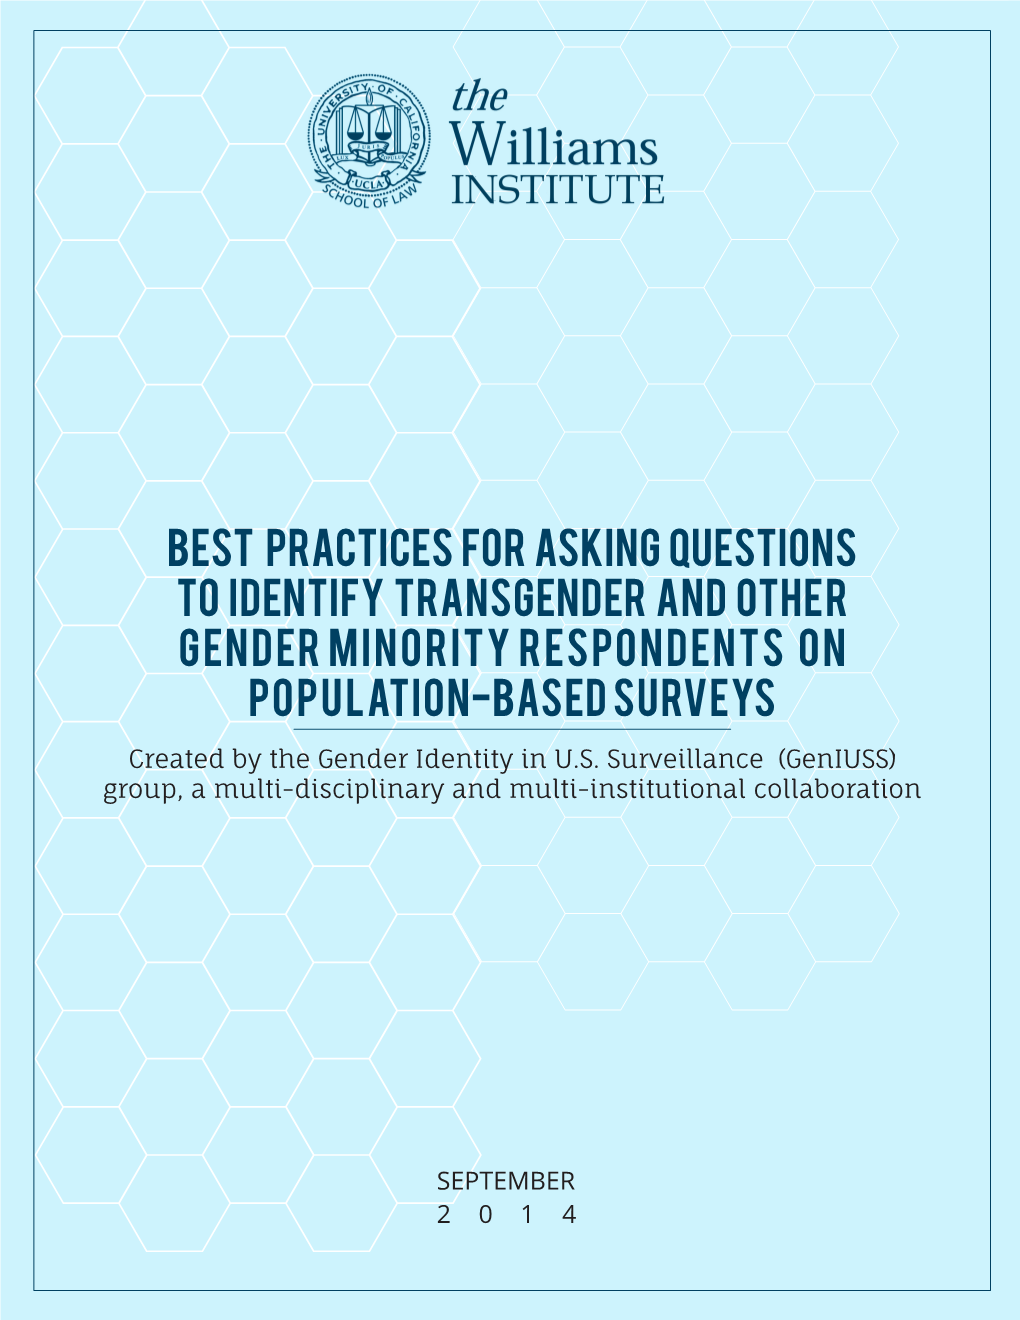 Best Practices for Asking Questions to Identify Transgender and Other Gender Minority Respondents on Population-Based Surveys